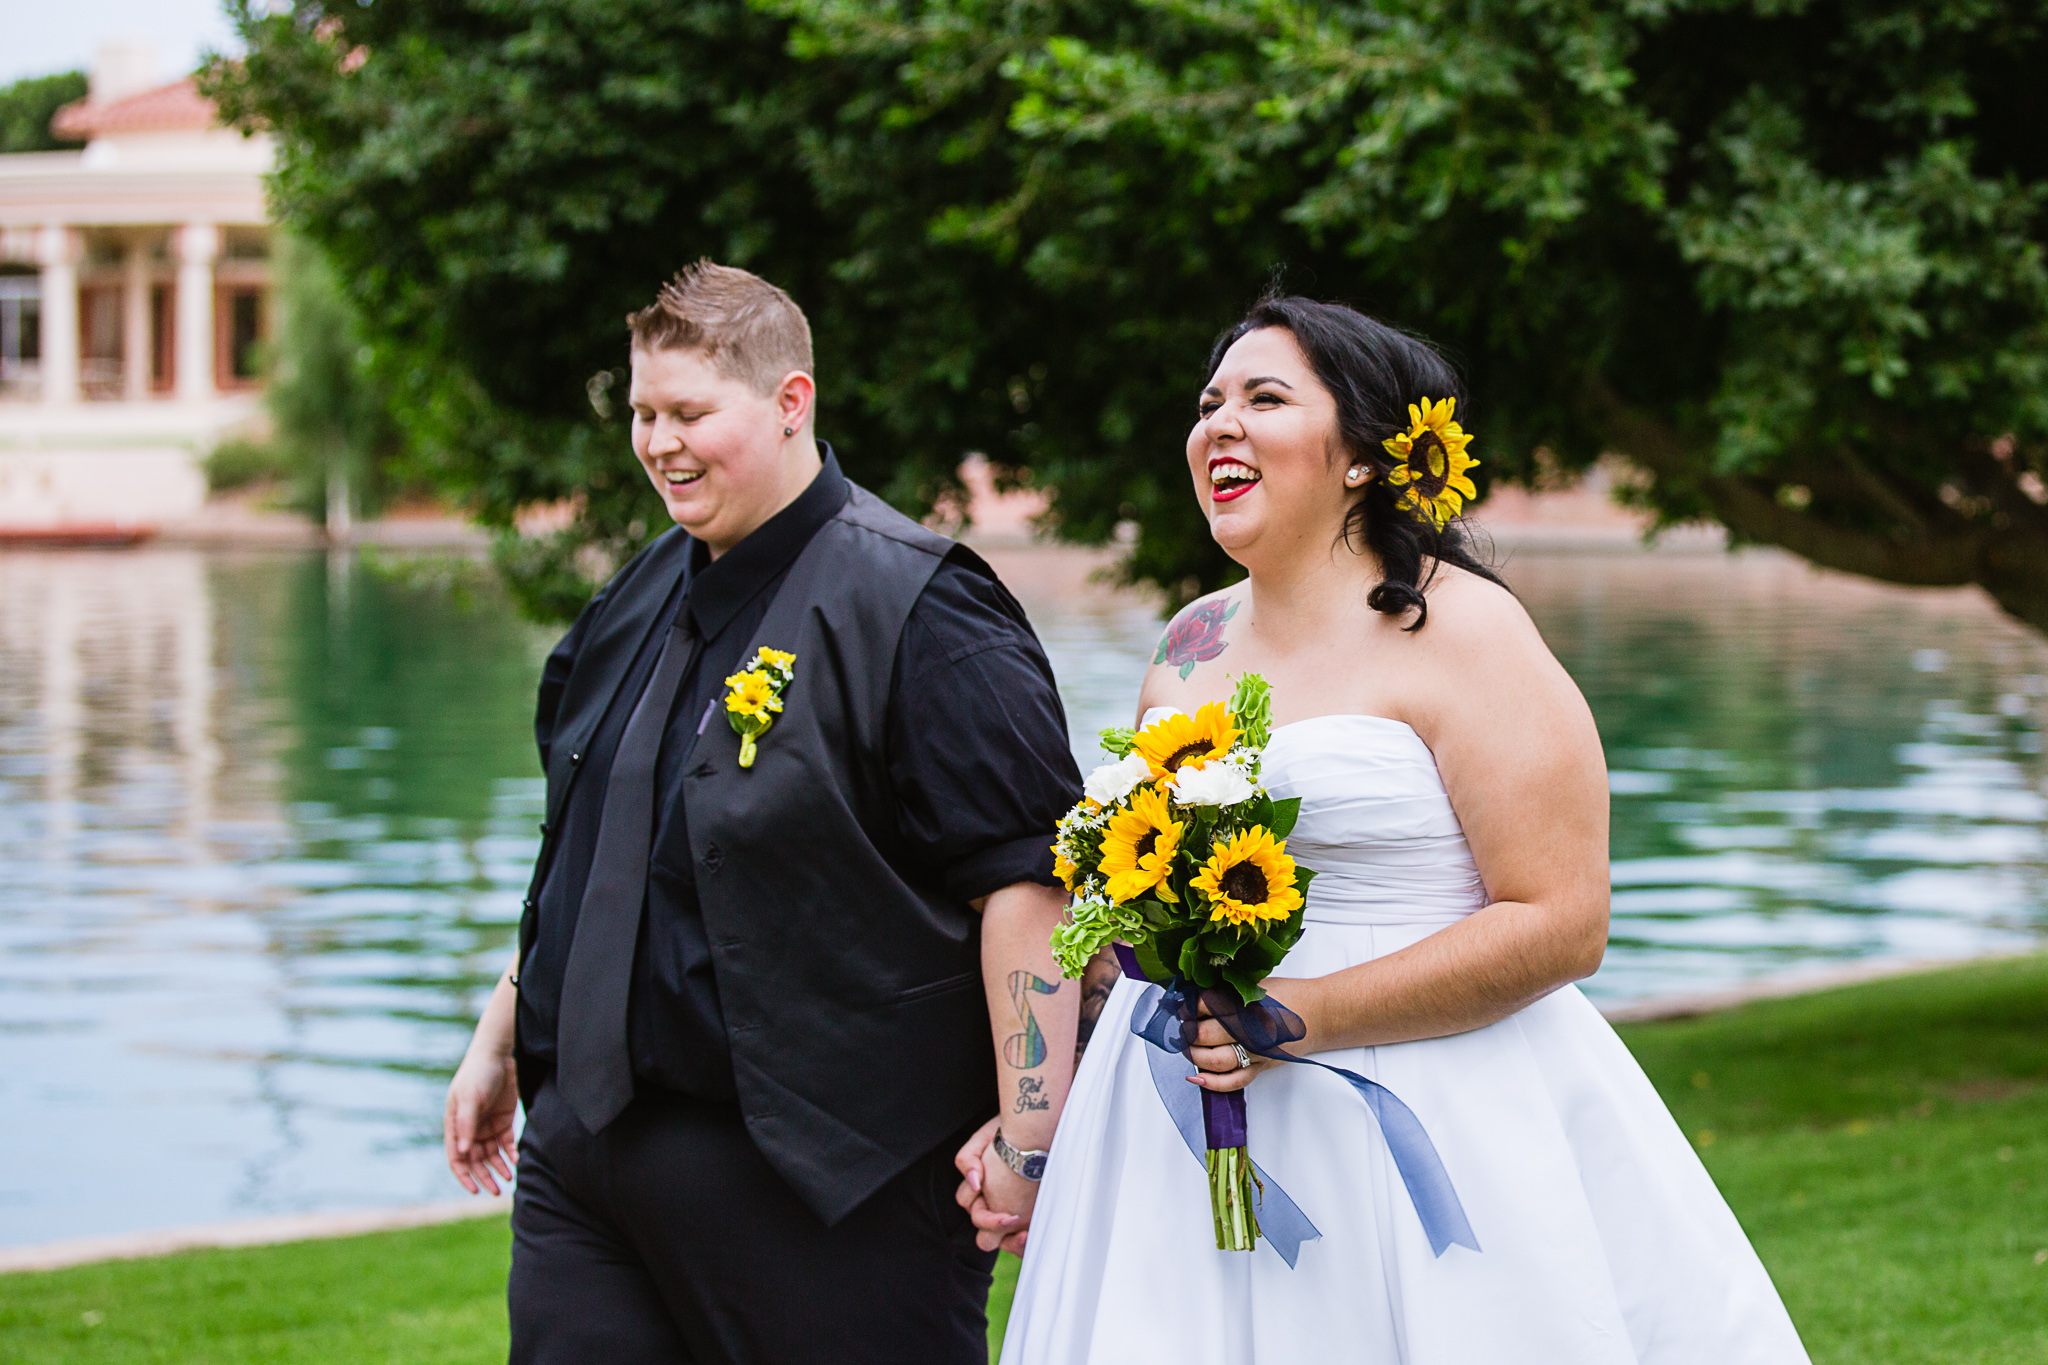 LGBT couple walking by a lake on their wedding day by Phoenix wedding photographers PMA Photography.